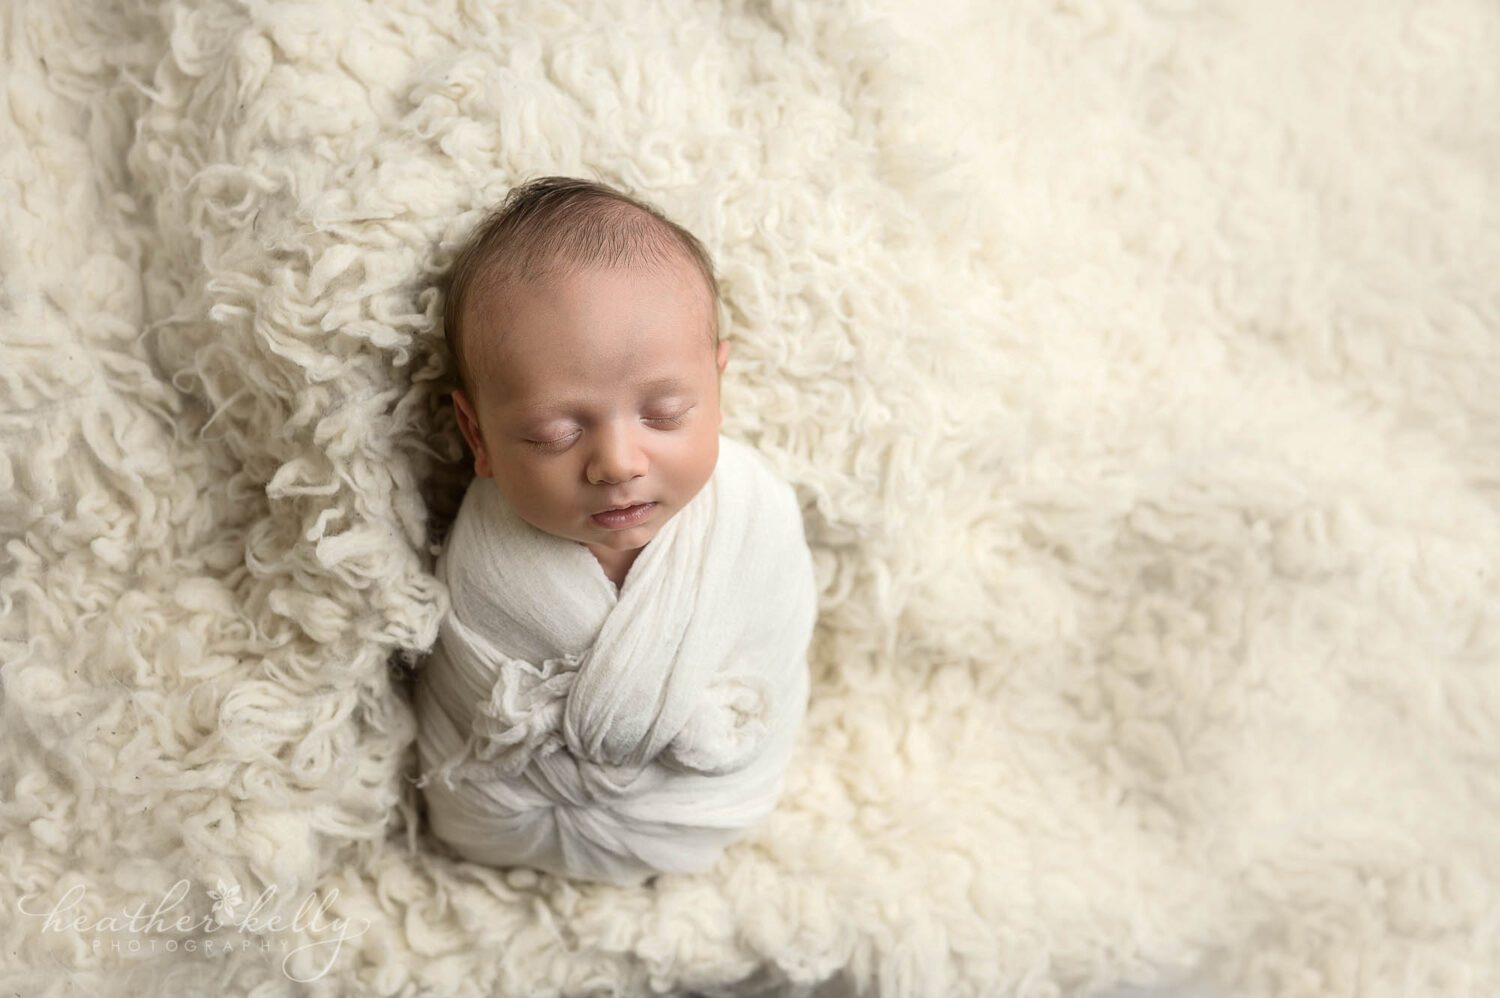 Danbury CT newborn boy photography session. Baby boy is wrapped in white and on a white flokati